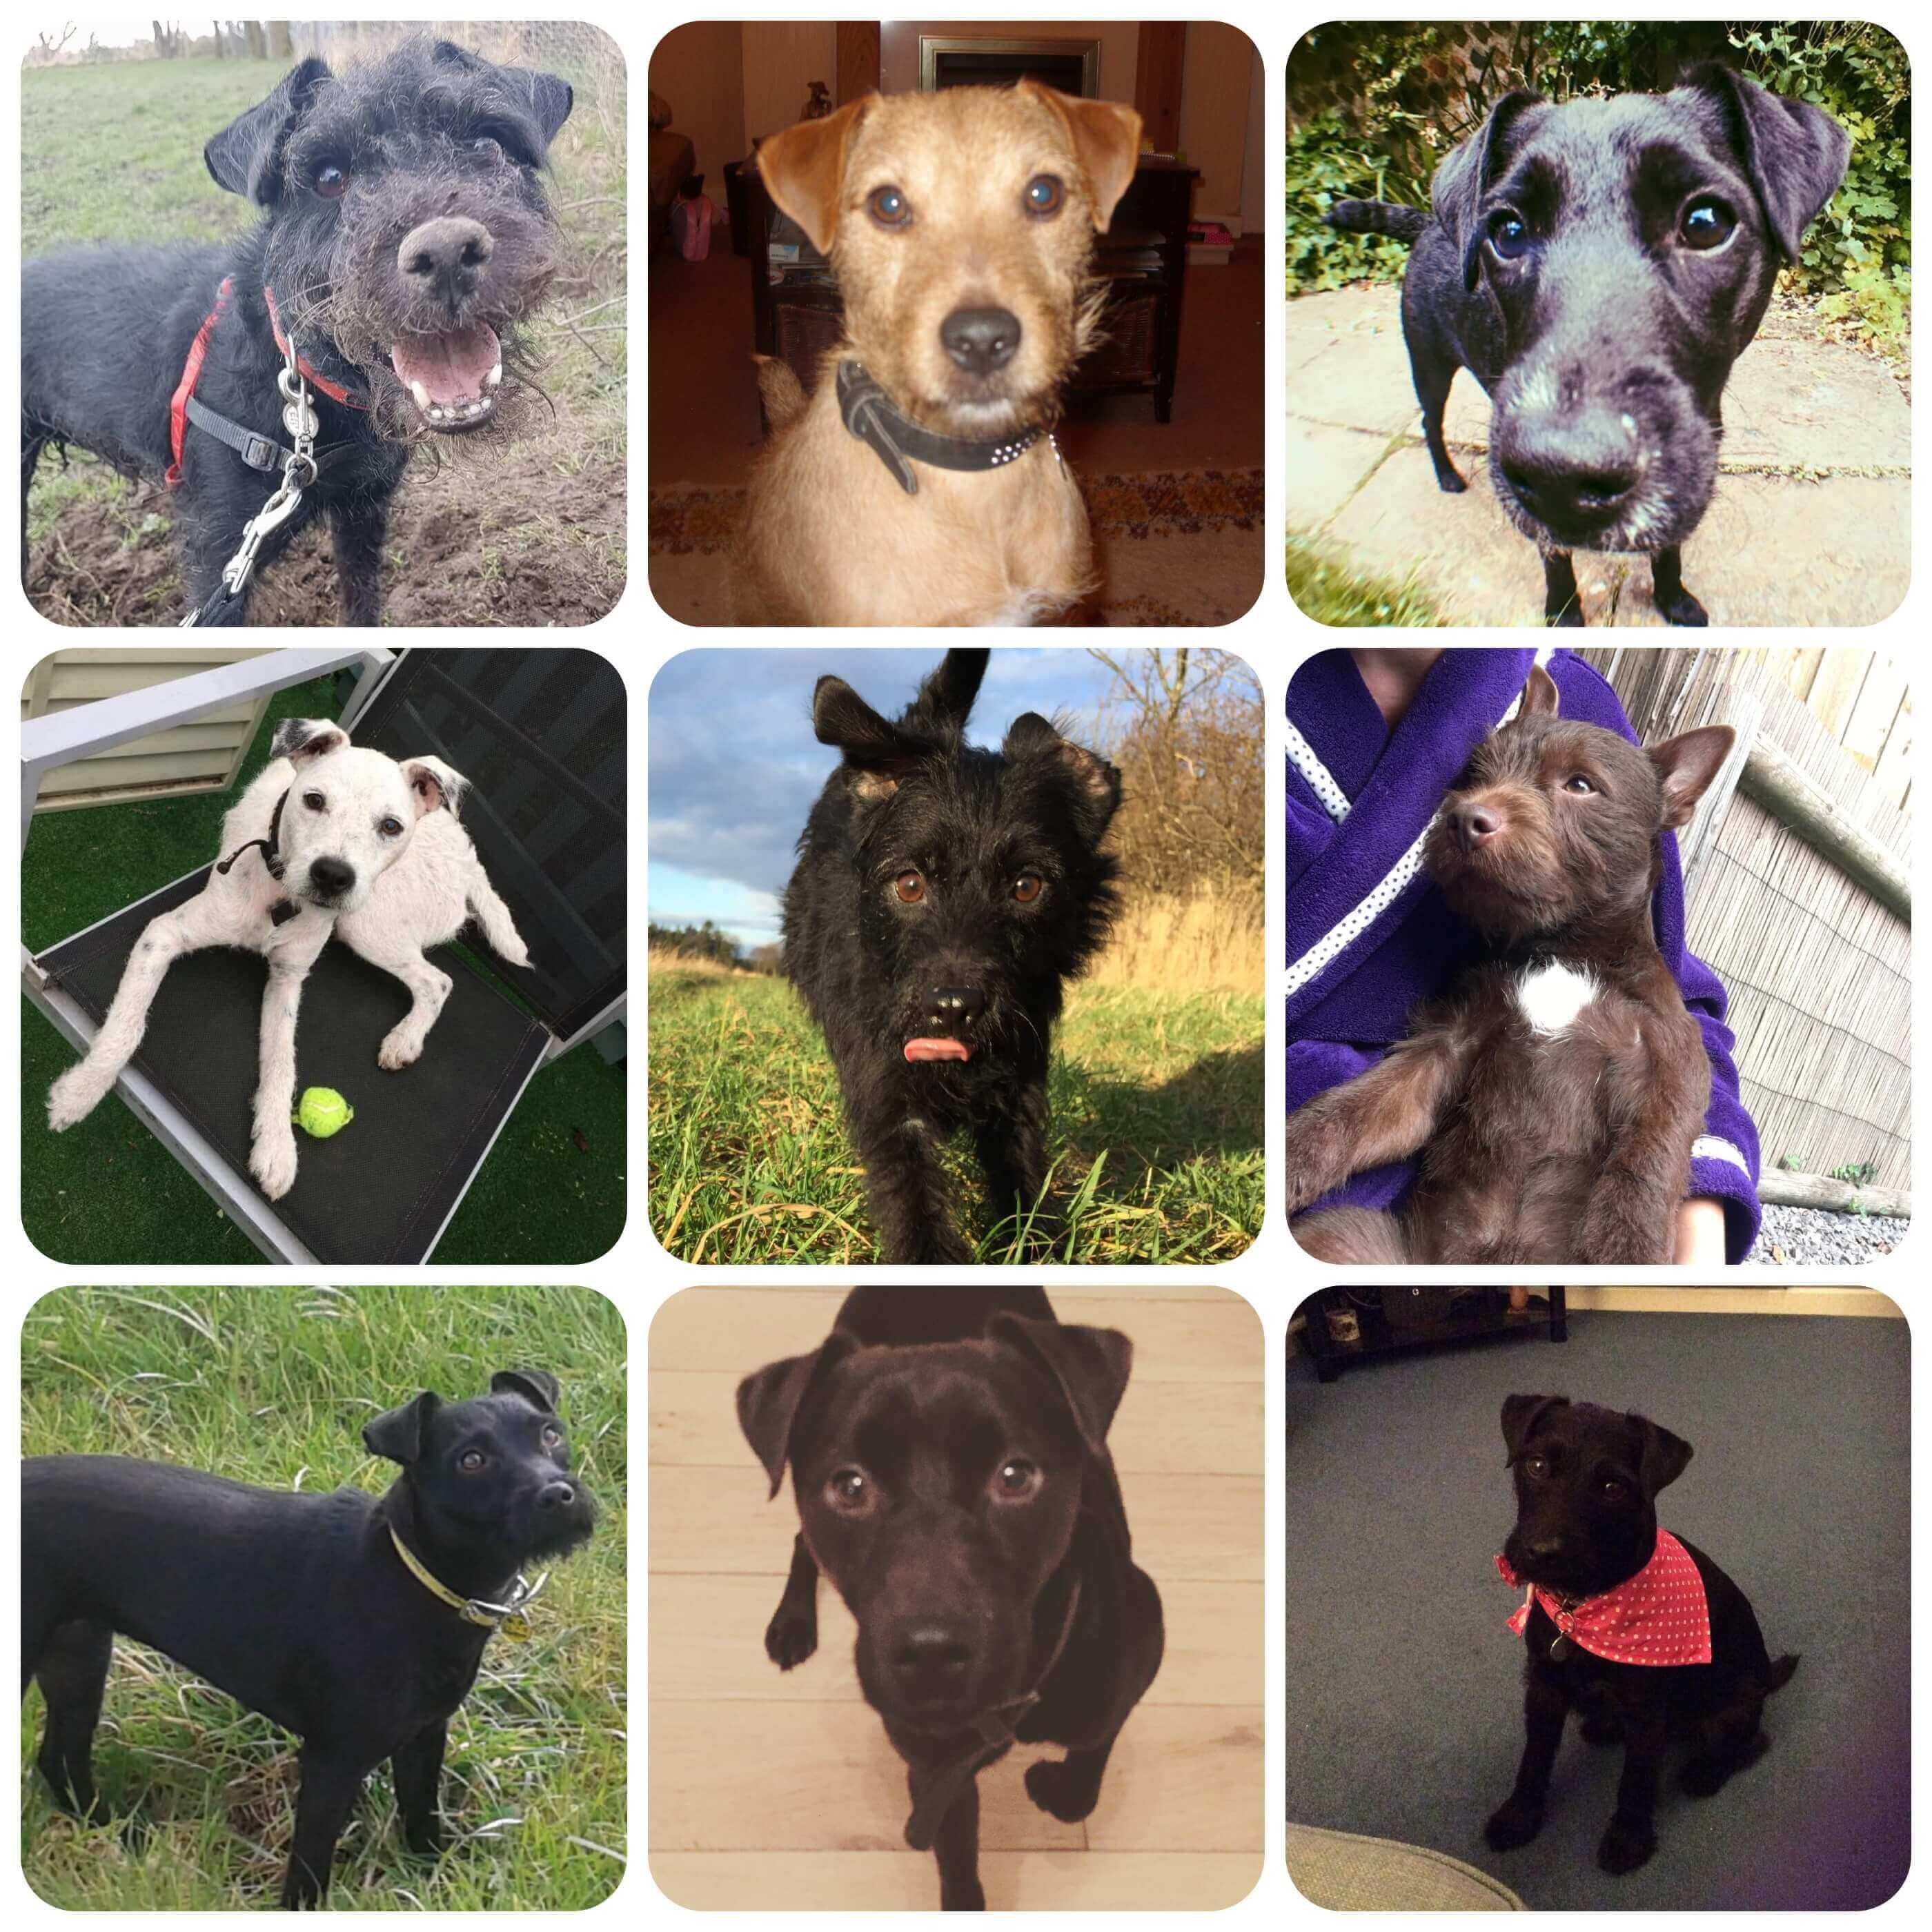 A collage of images of Patterdale Terriers. They all have slightly scruffy looking fur, floppy ears and well proportioned faces. They range in colour from black to white and tan